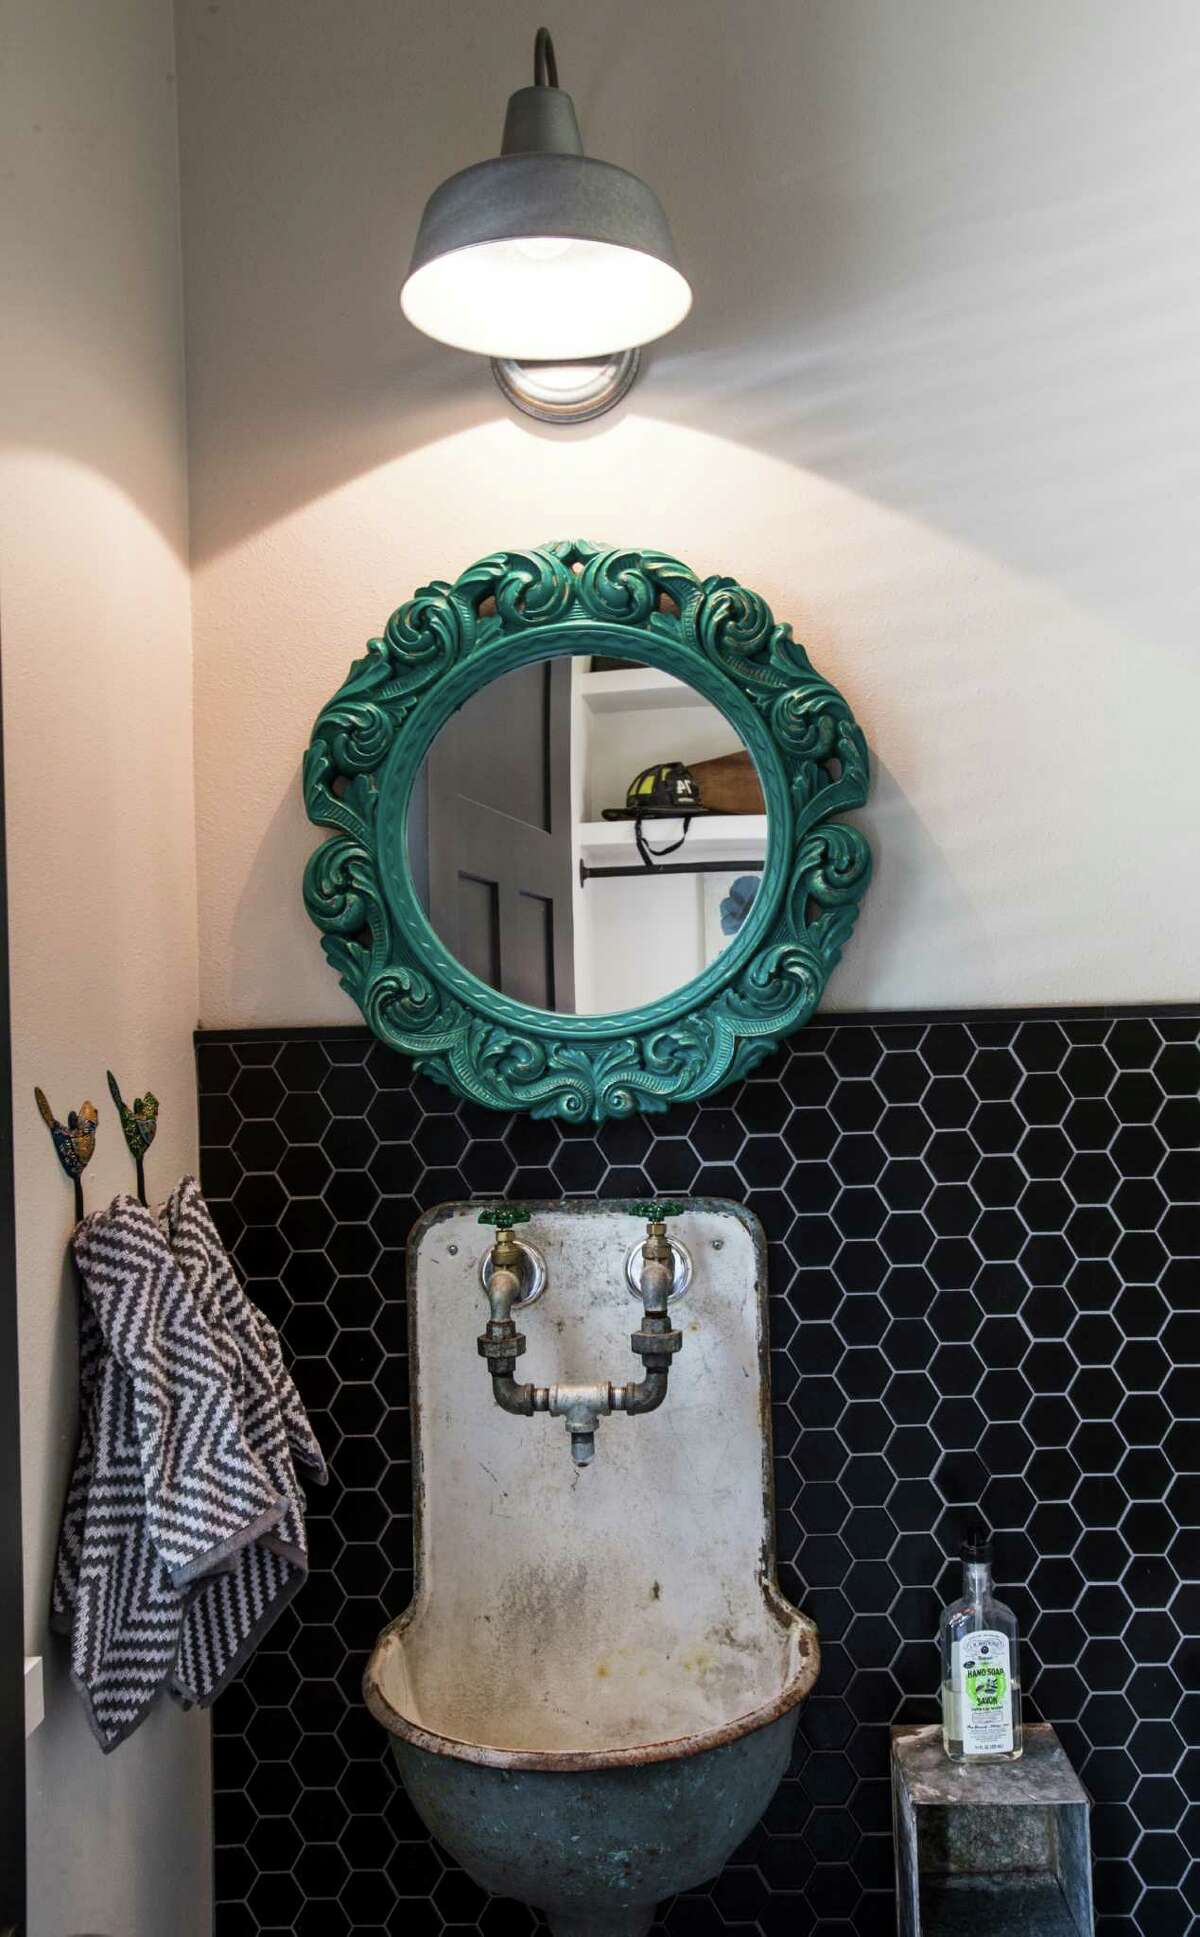 ﻿ANTIQUES:  An antique sink and mirror play off ﻿sleek black ﻿tiles in this powder room.